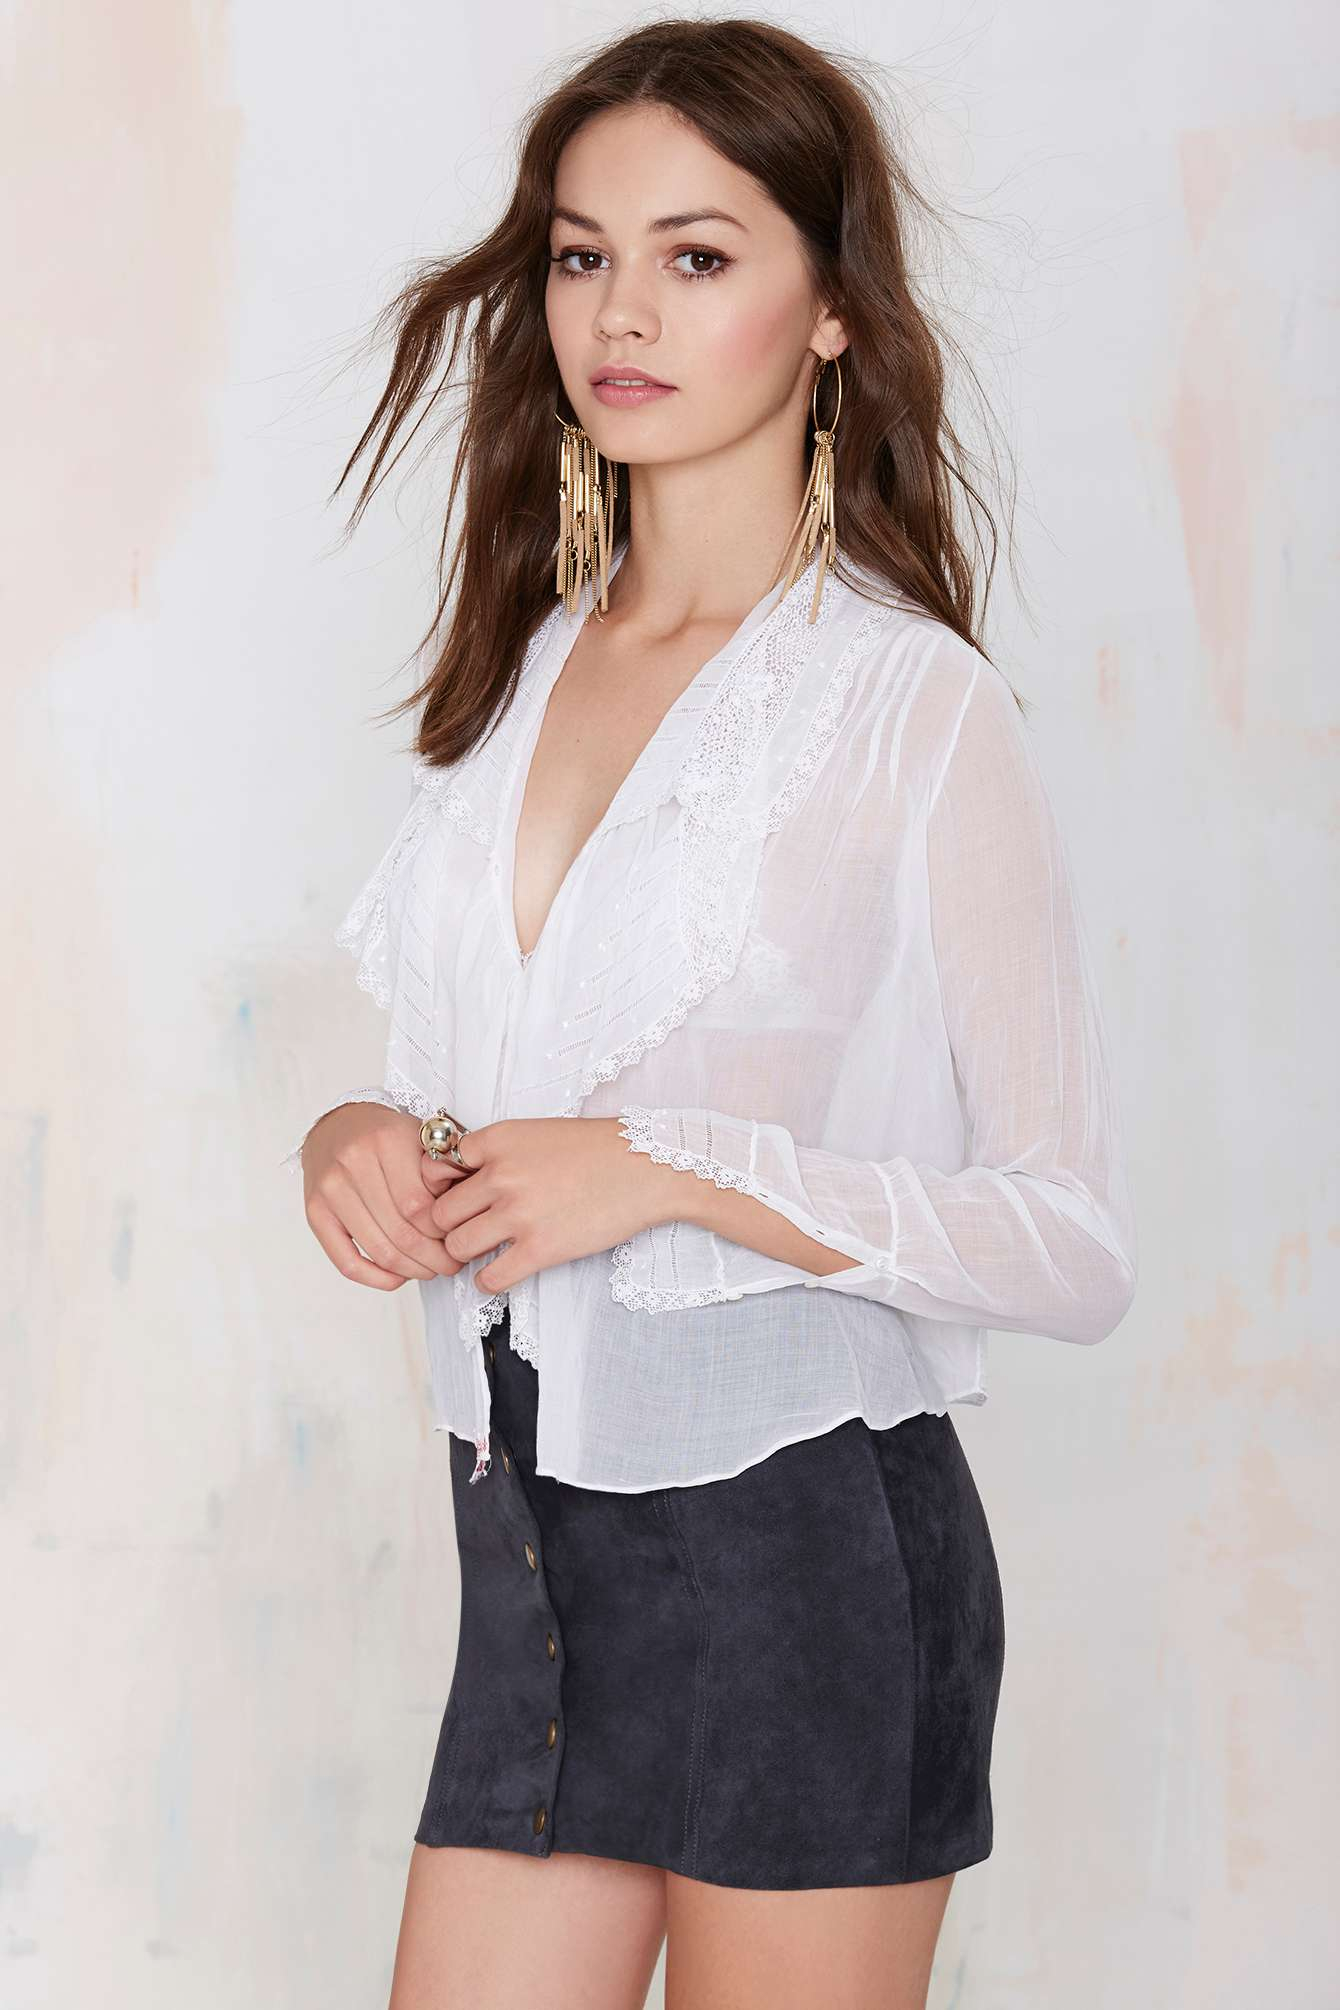 Nasty Gal Vintage Mademoiselle Chiffon Blouse in White - Lyst